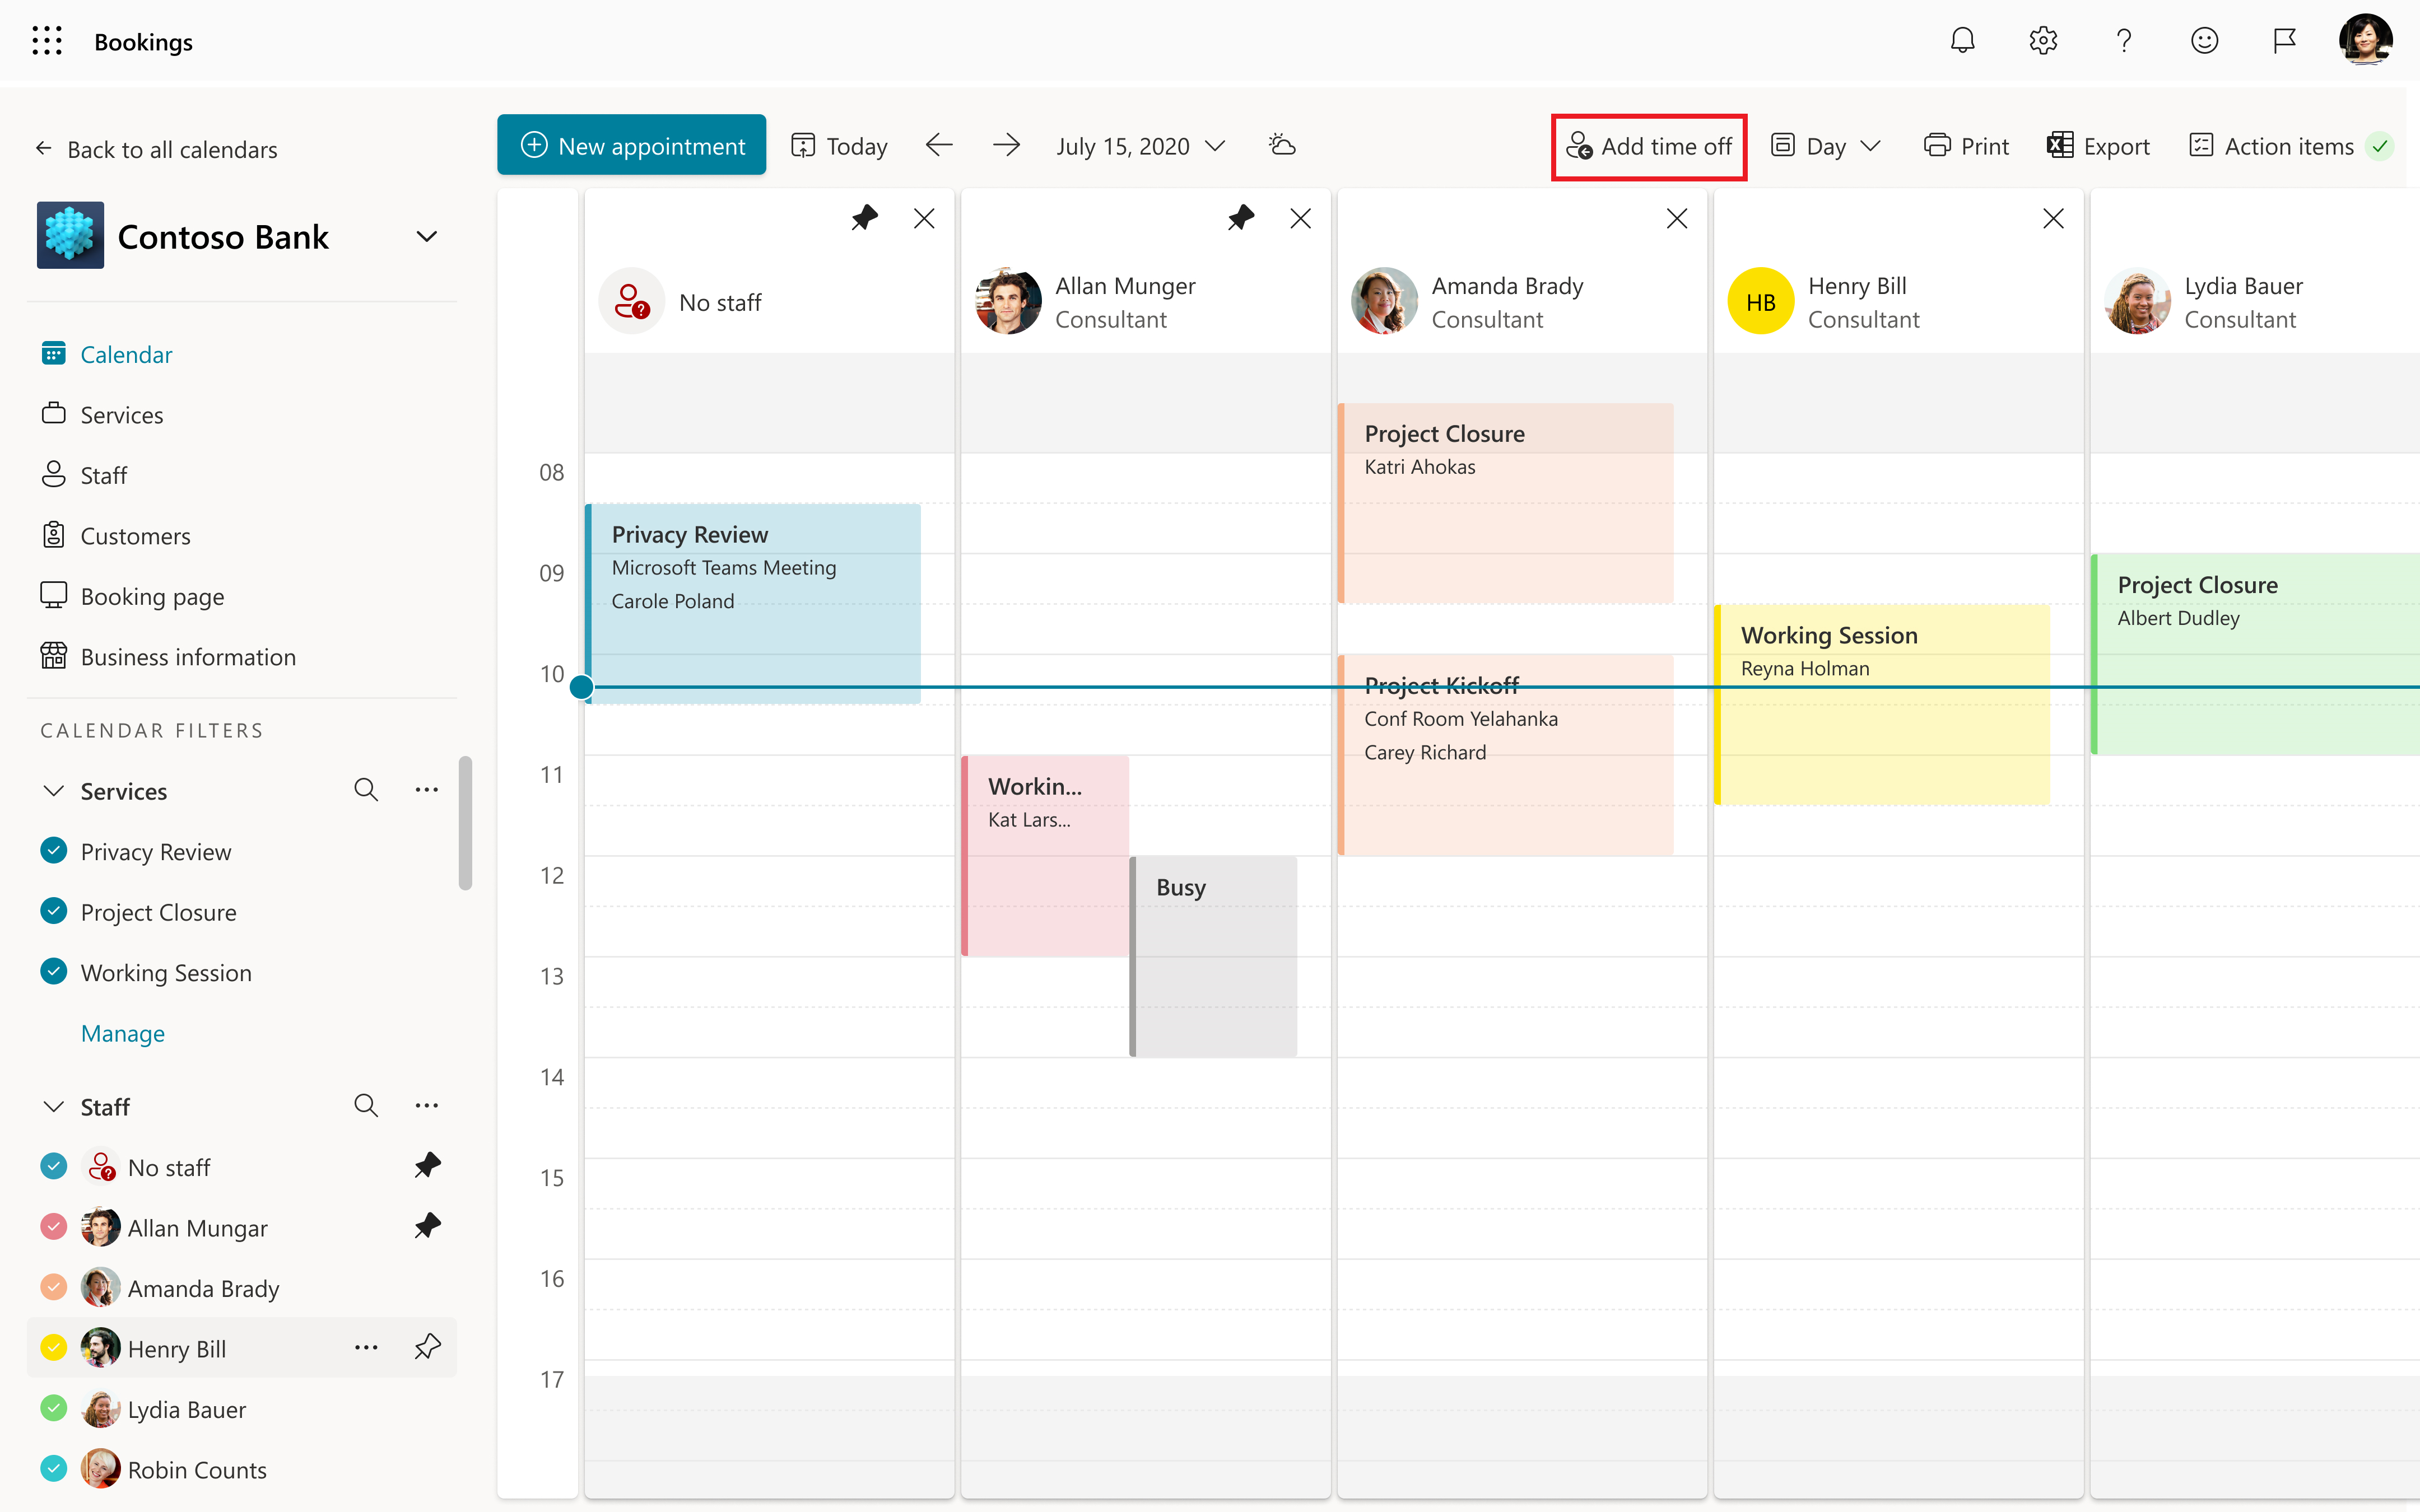 Bookings calendar view and time off button.